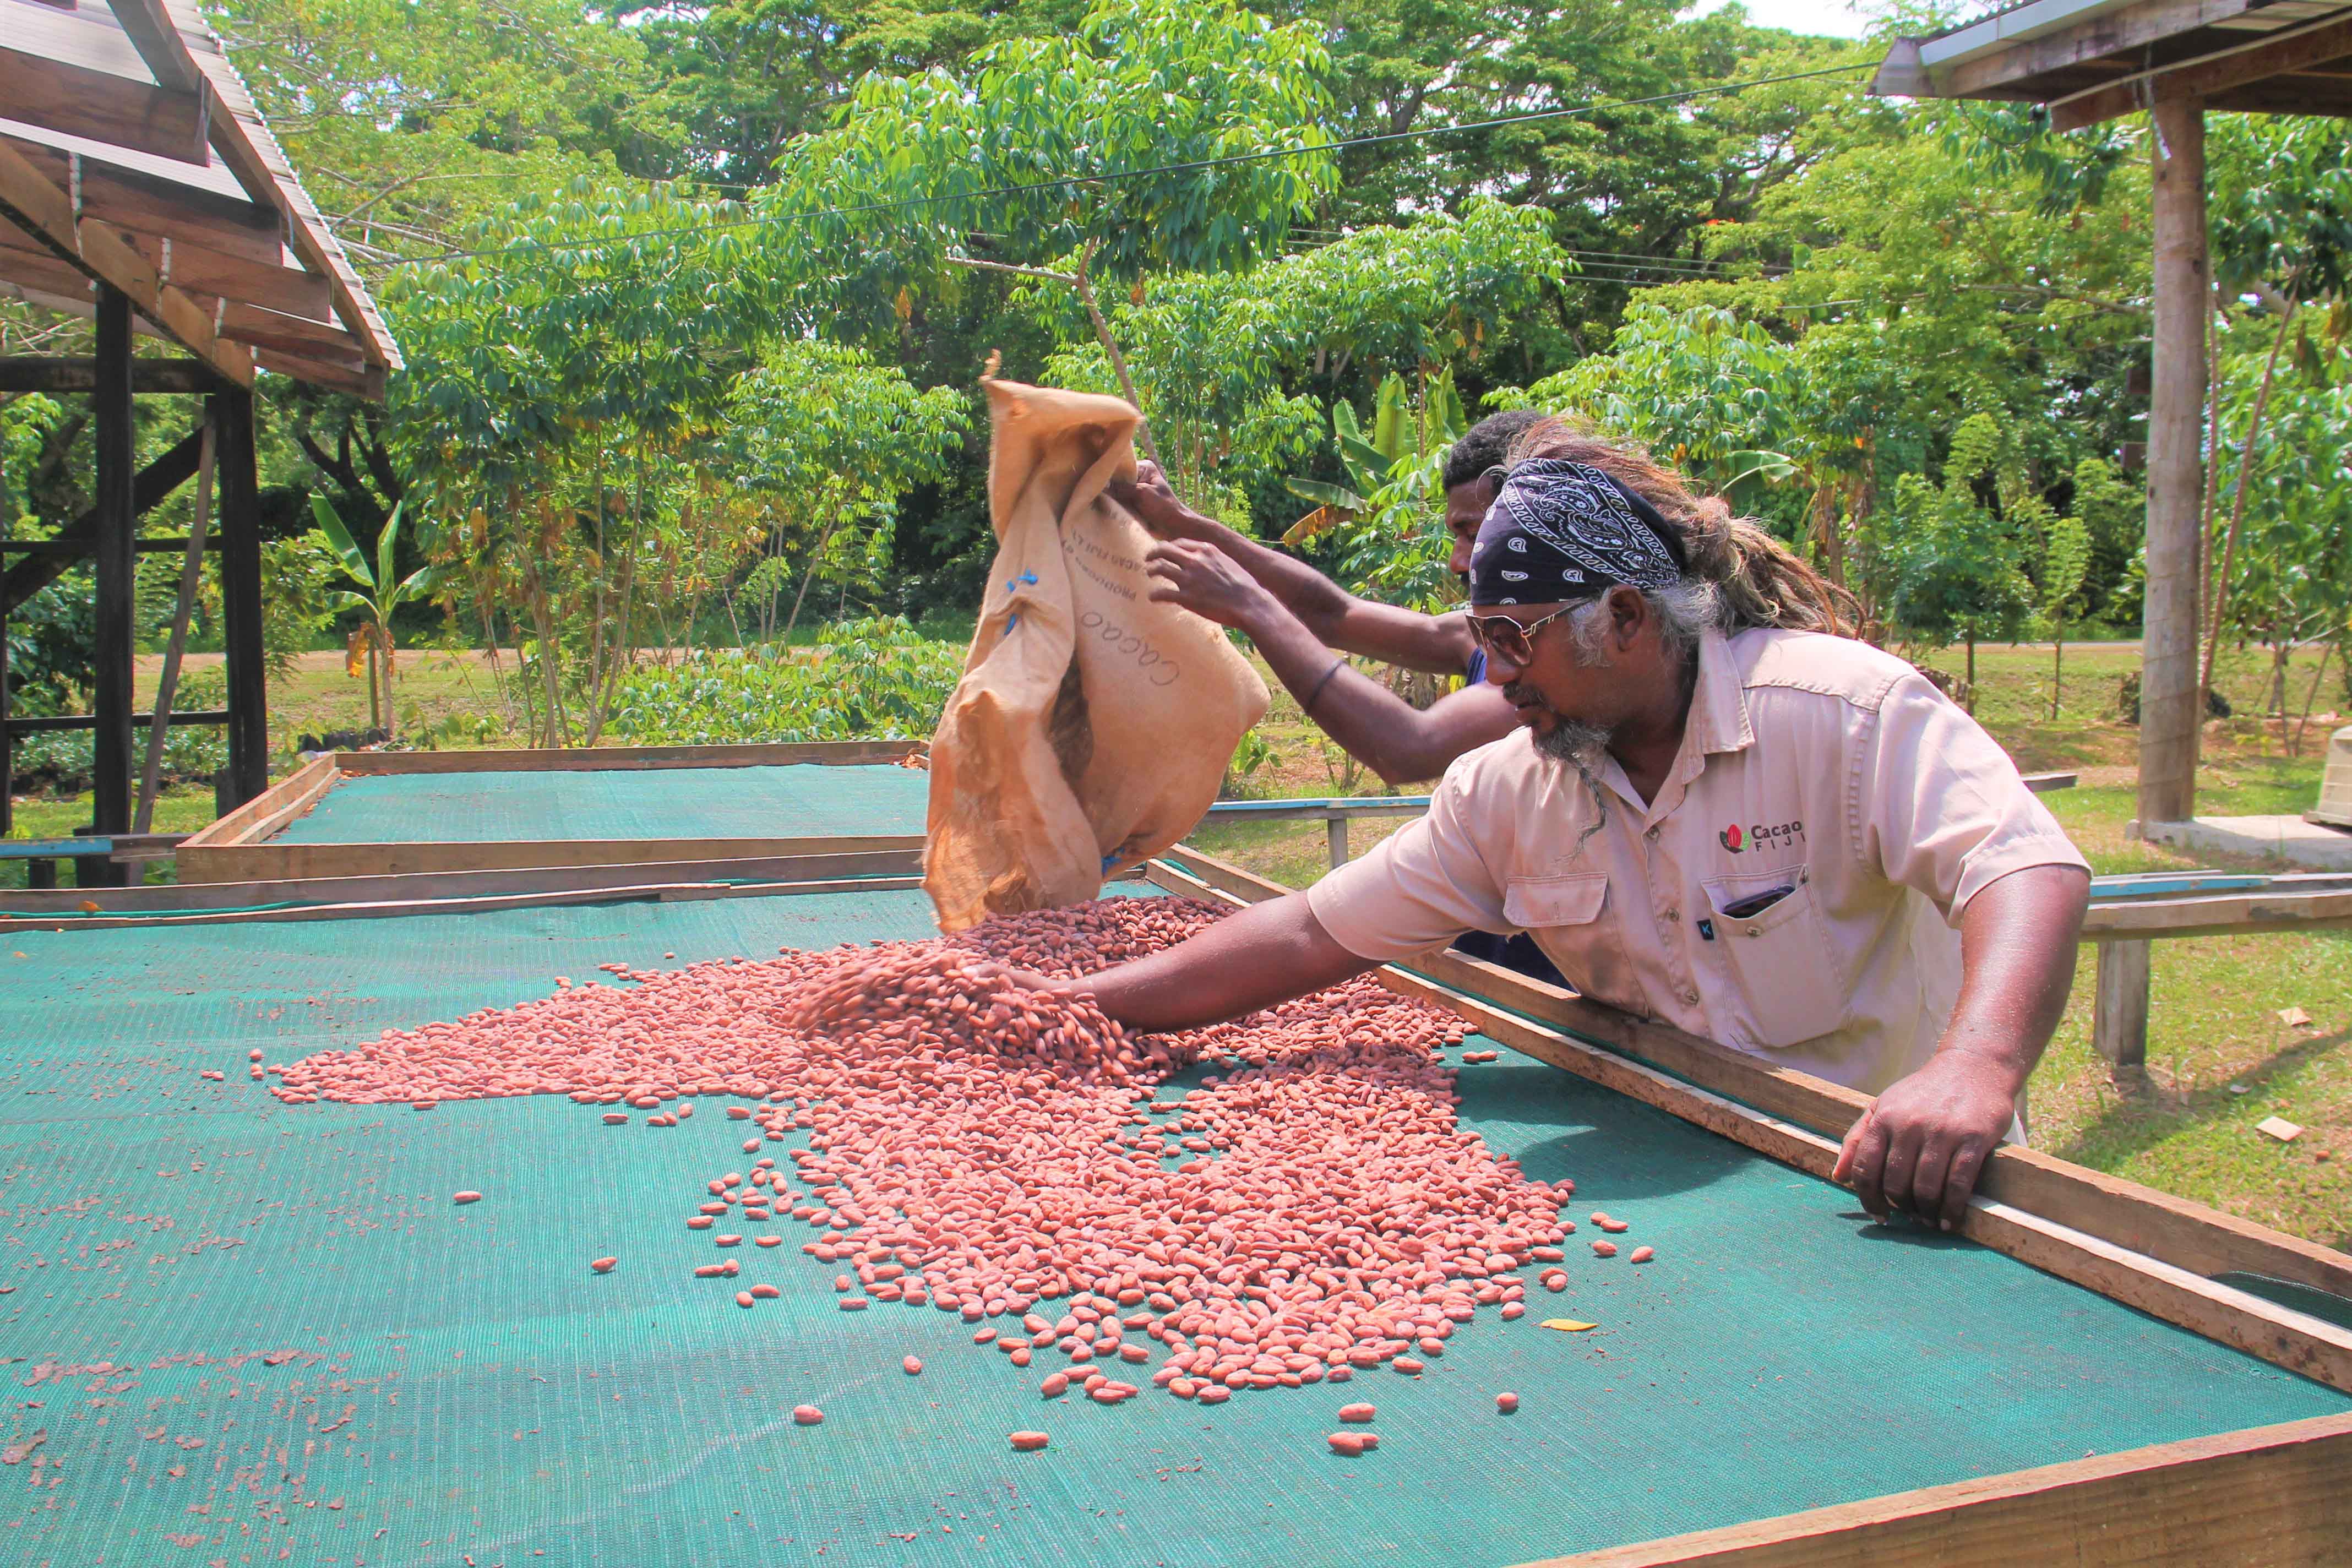 The drying process is just as crucial to quality as fermentation. Poor drying practices will lead to poor quality cocoa. In areas where there is a lot of rain and high humidity, such as the tropical environment of the Pacific, drying is a particular challenge to avoid the production of poor-quality beans.